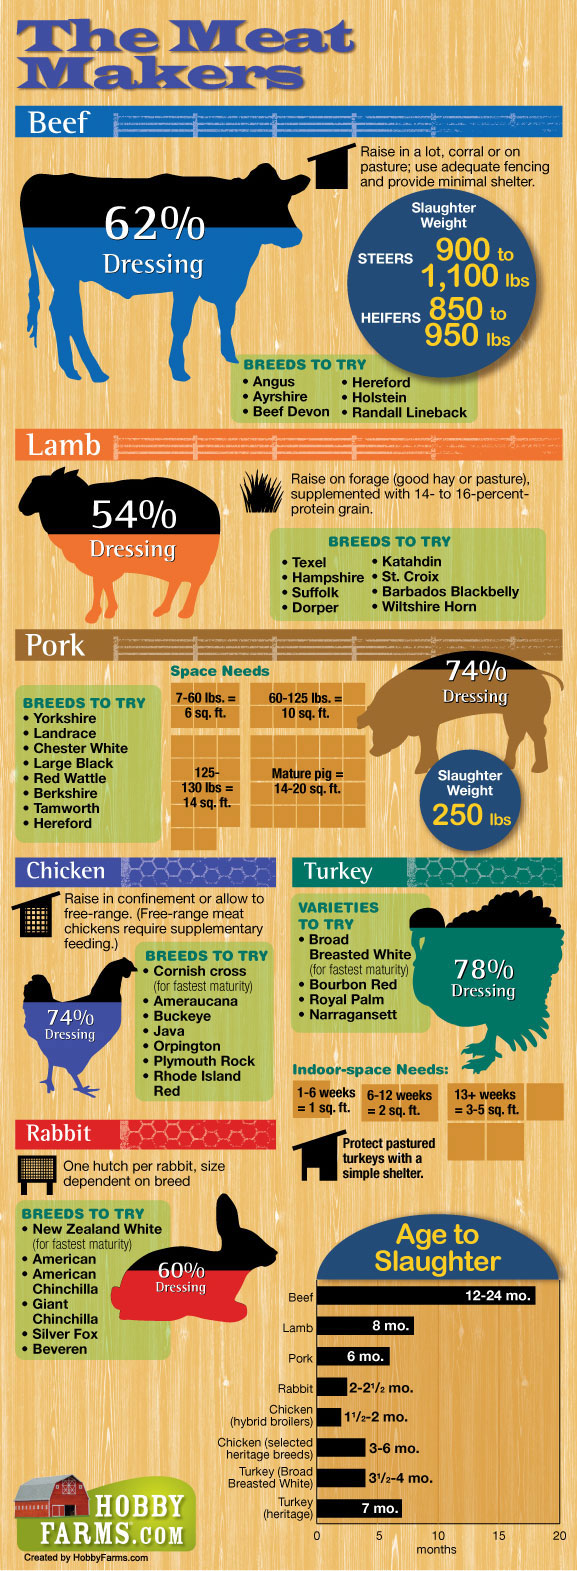 infographic-meat-makers